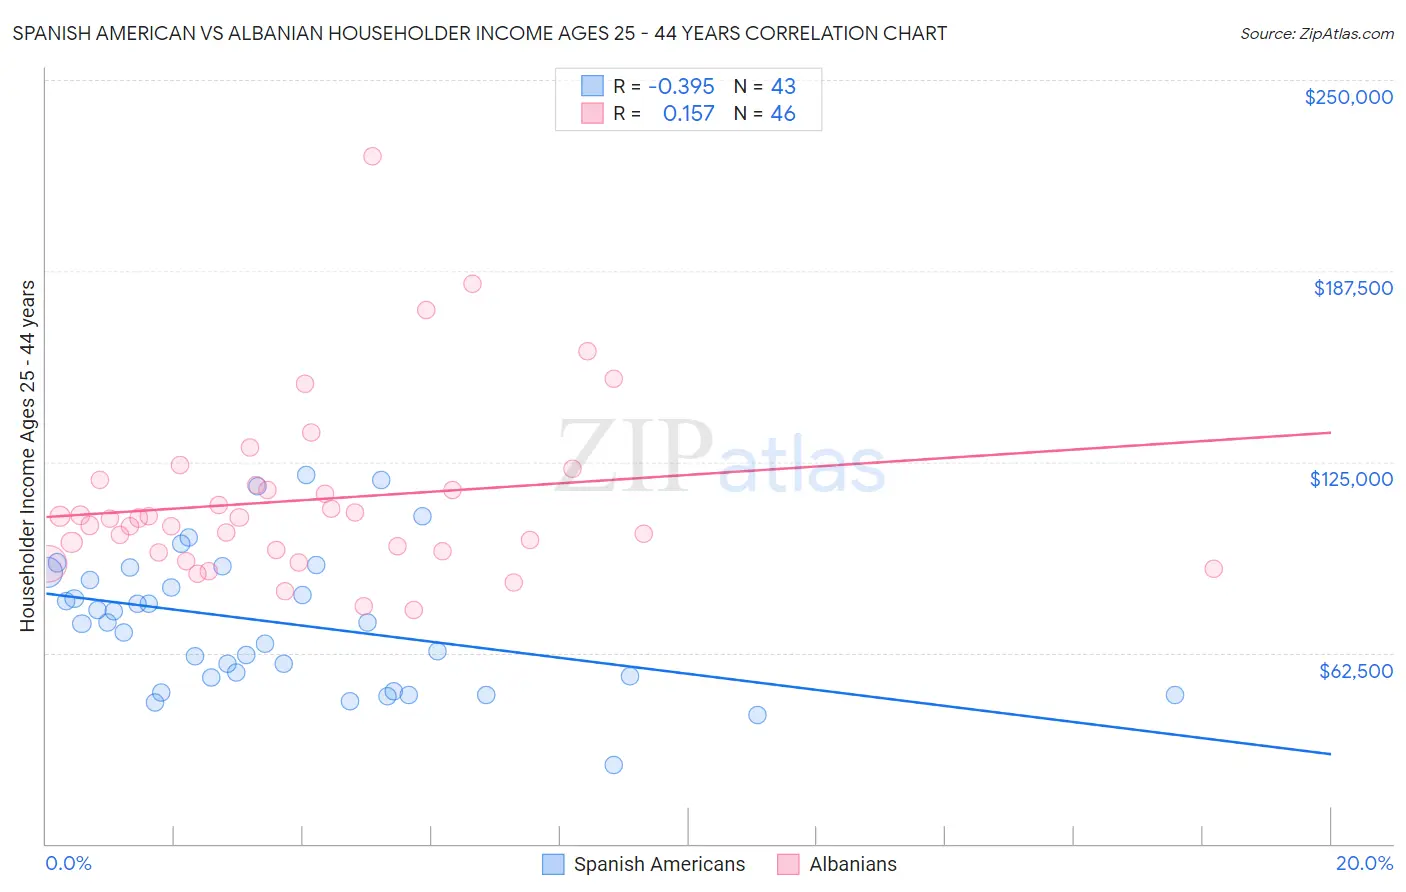 Spanish American vs Albanian Householder Income Ages 25 - 44 years